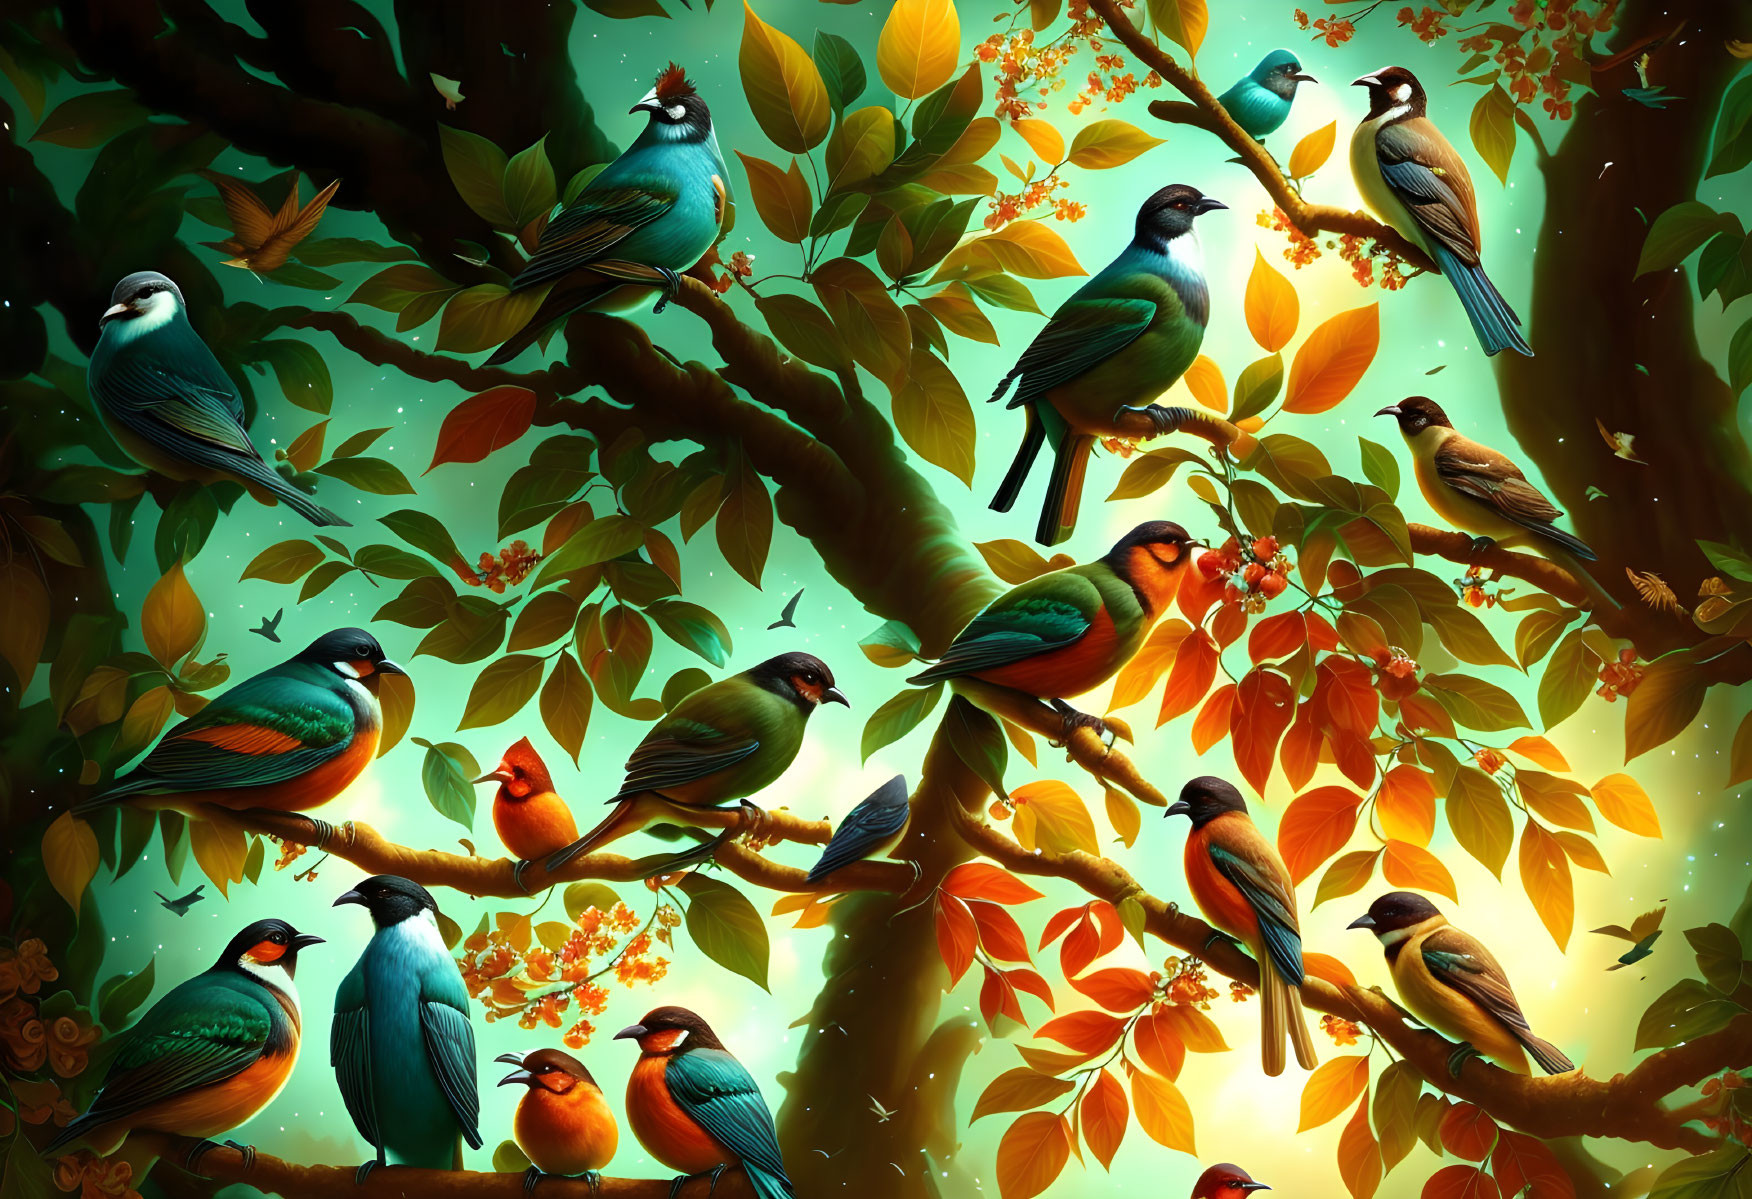 Colorful Birds Perched on Tree Branches with Green Leaves and Orange Fruits